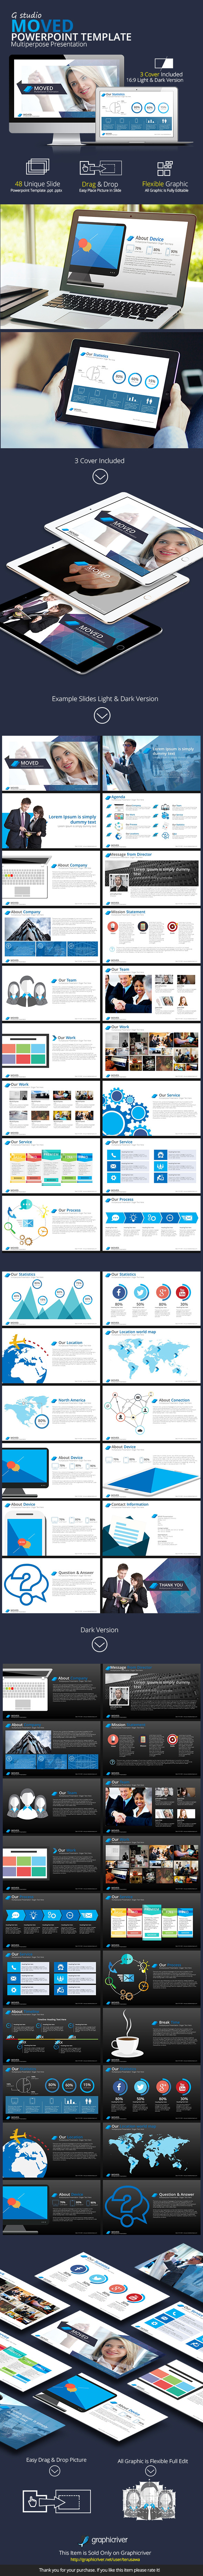 Moved Powerpoint Template